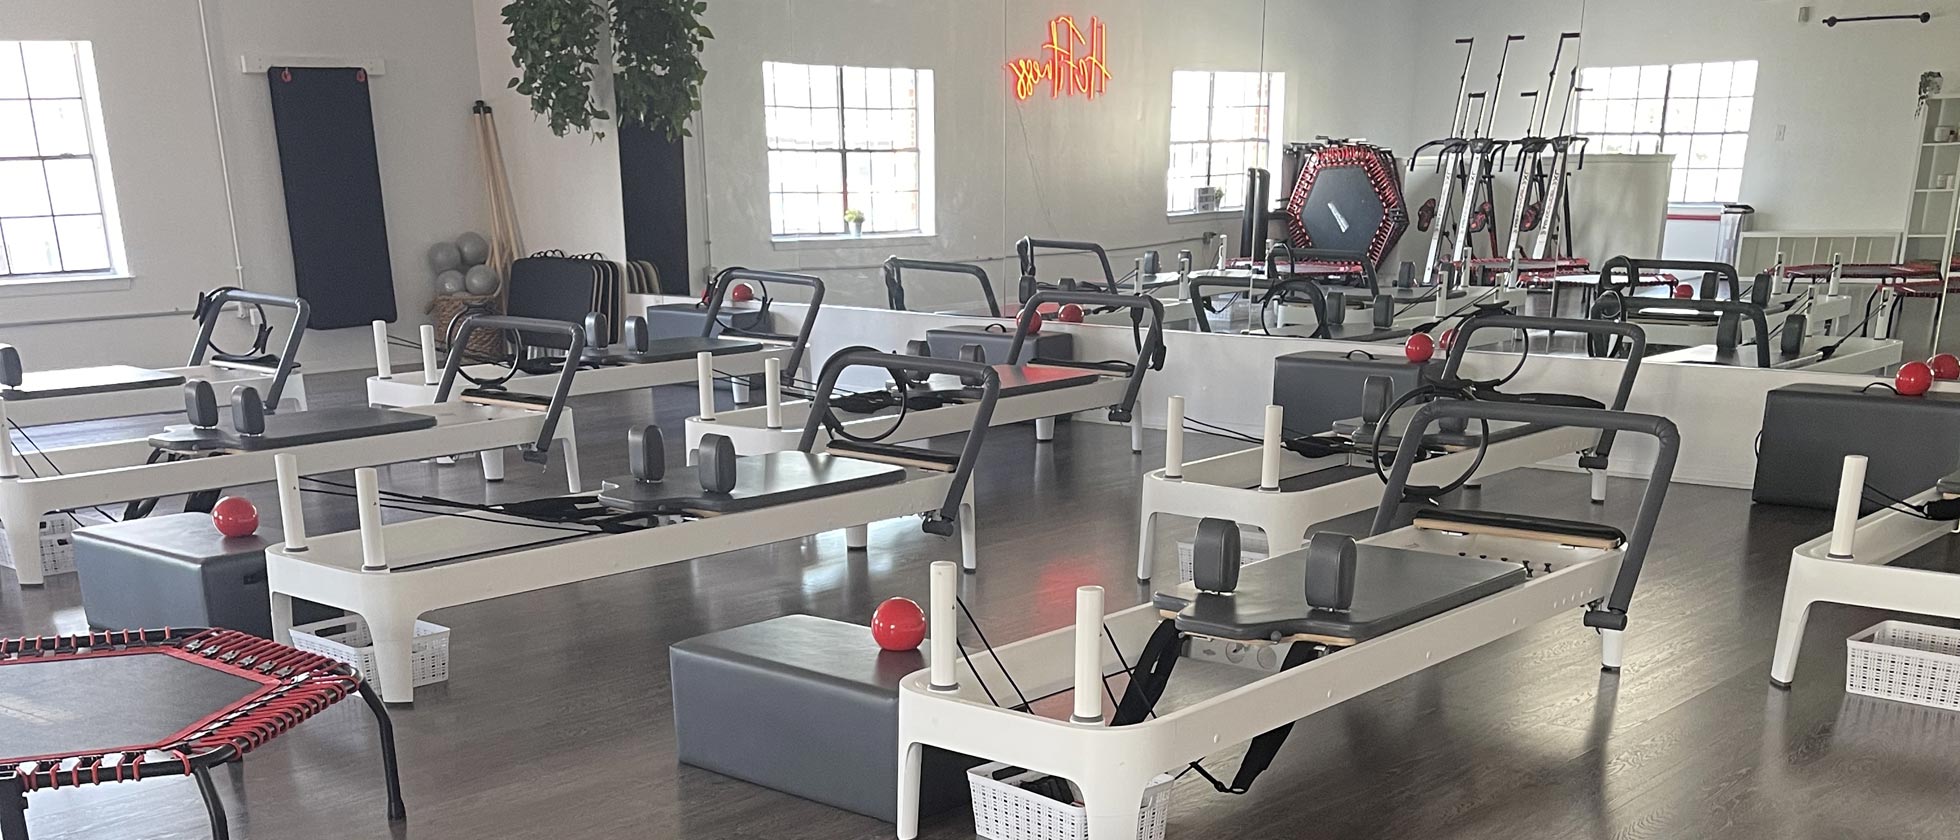 Check Out Our Pilates Studio Near Rice University